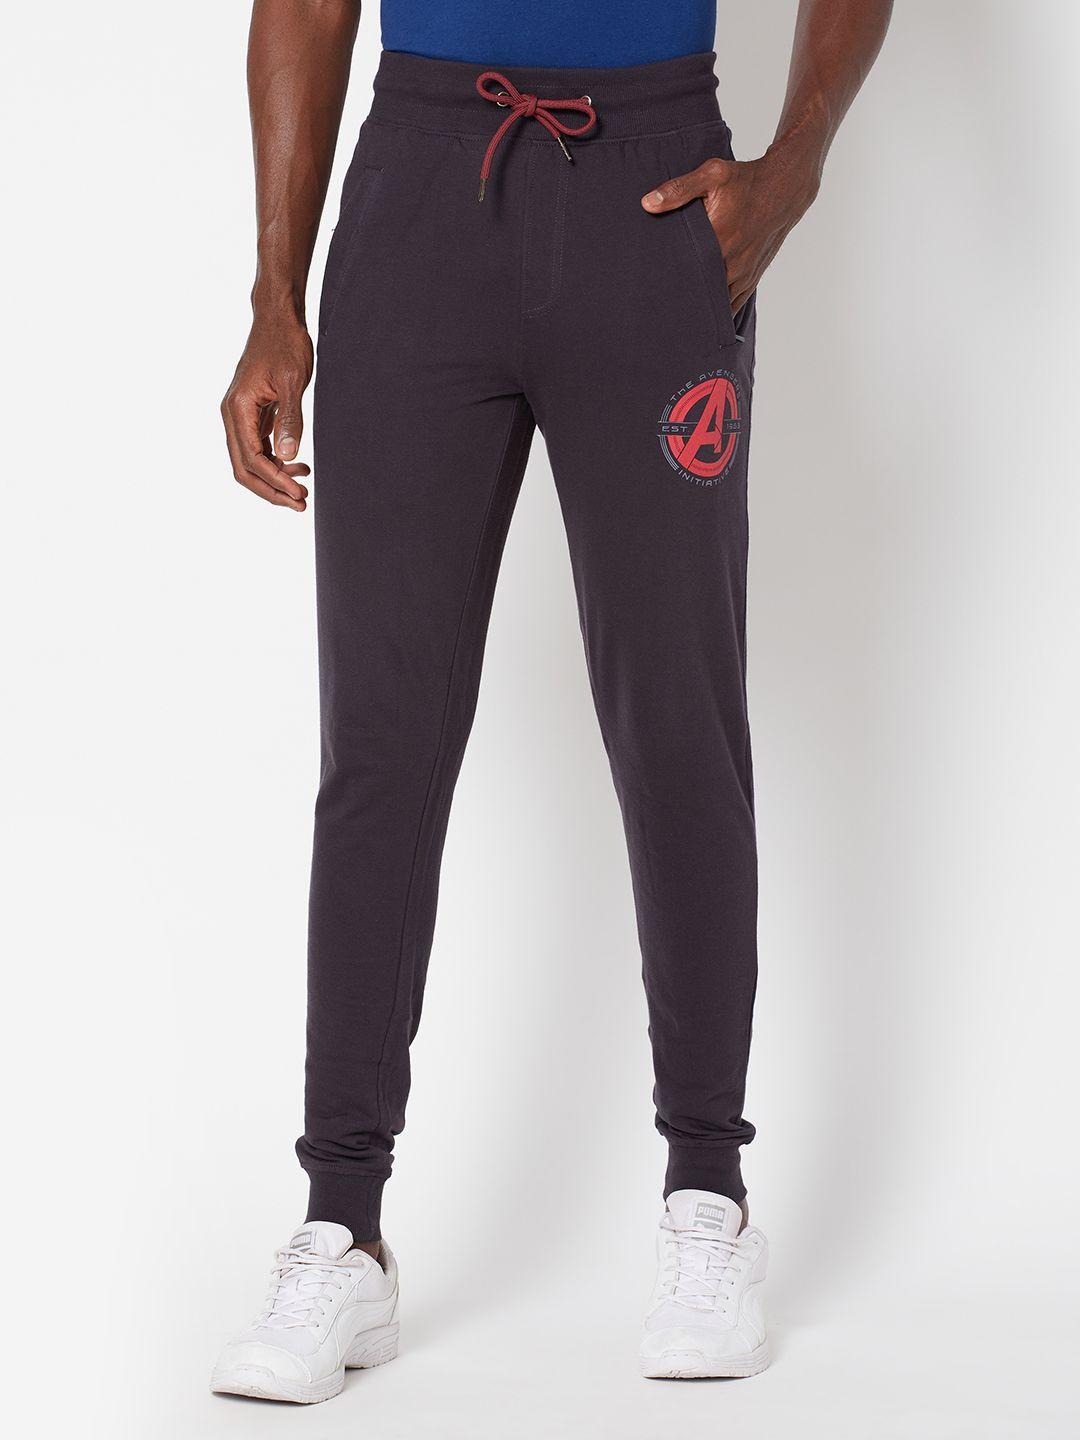 sporto men charcoal grey & red avengers printed cotton joggers